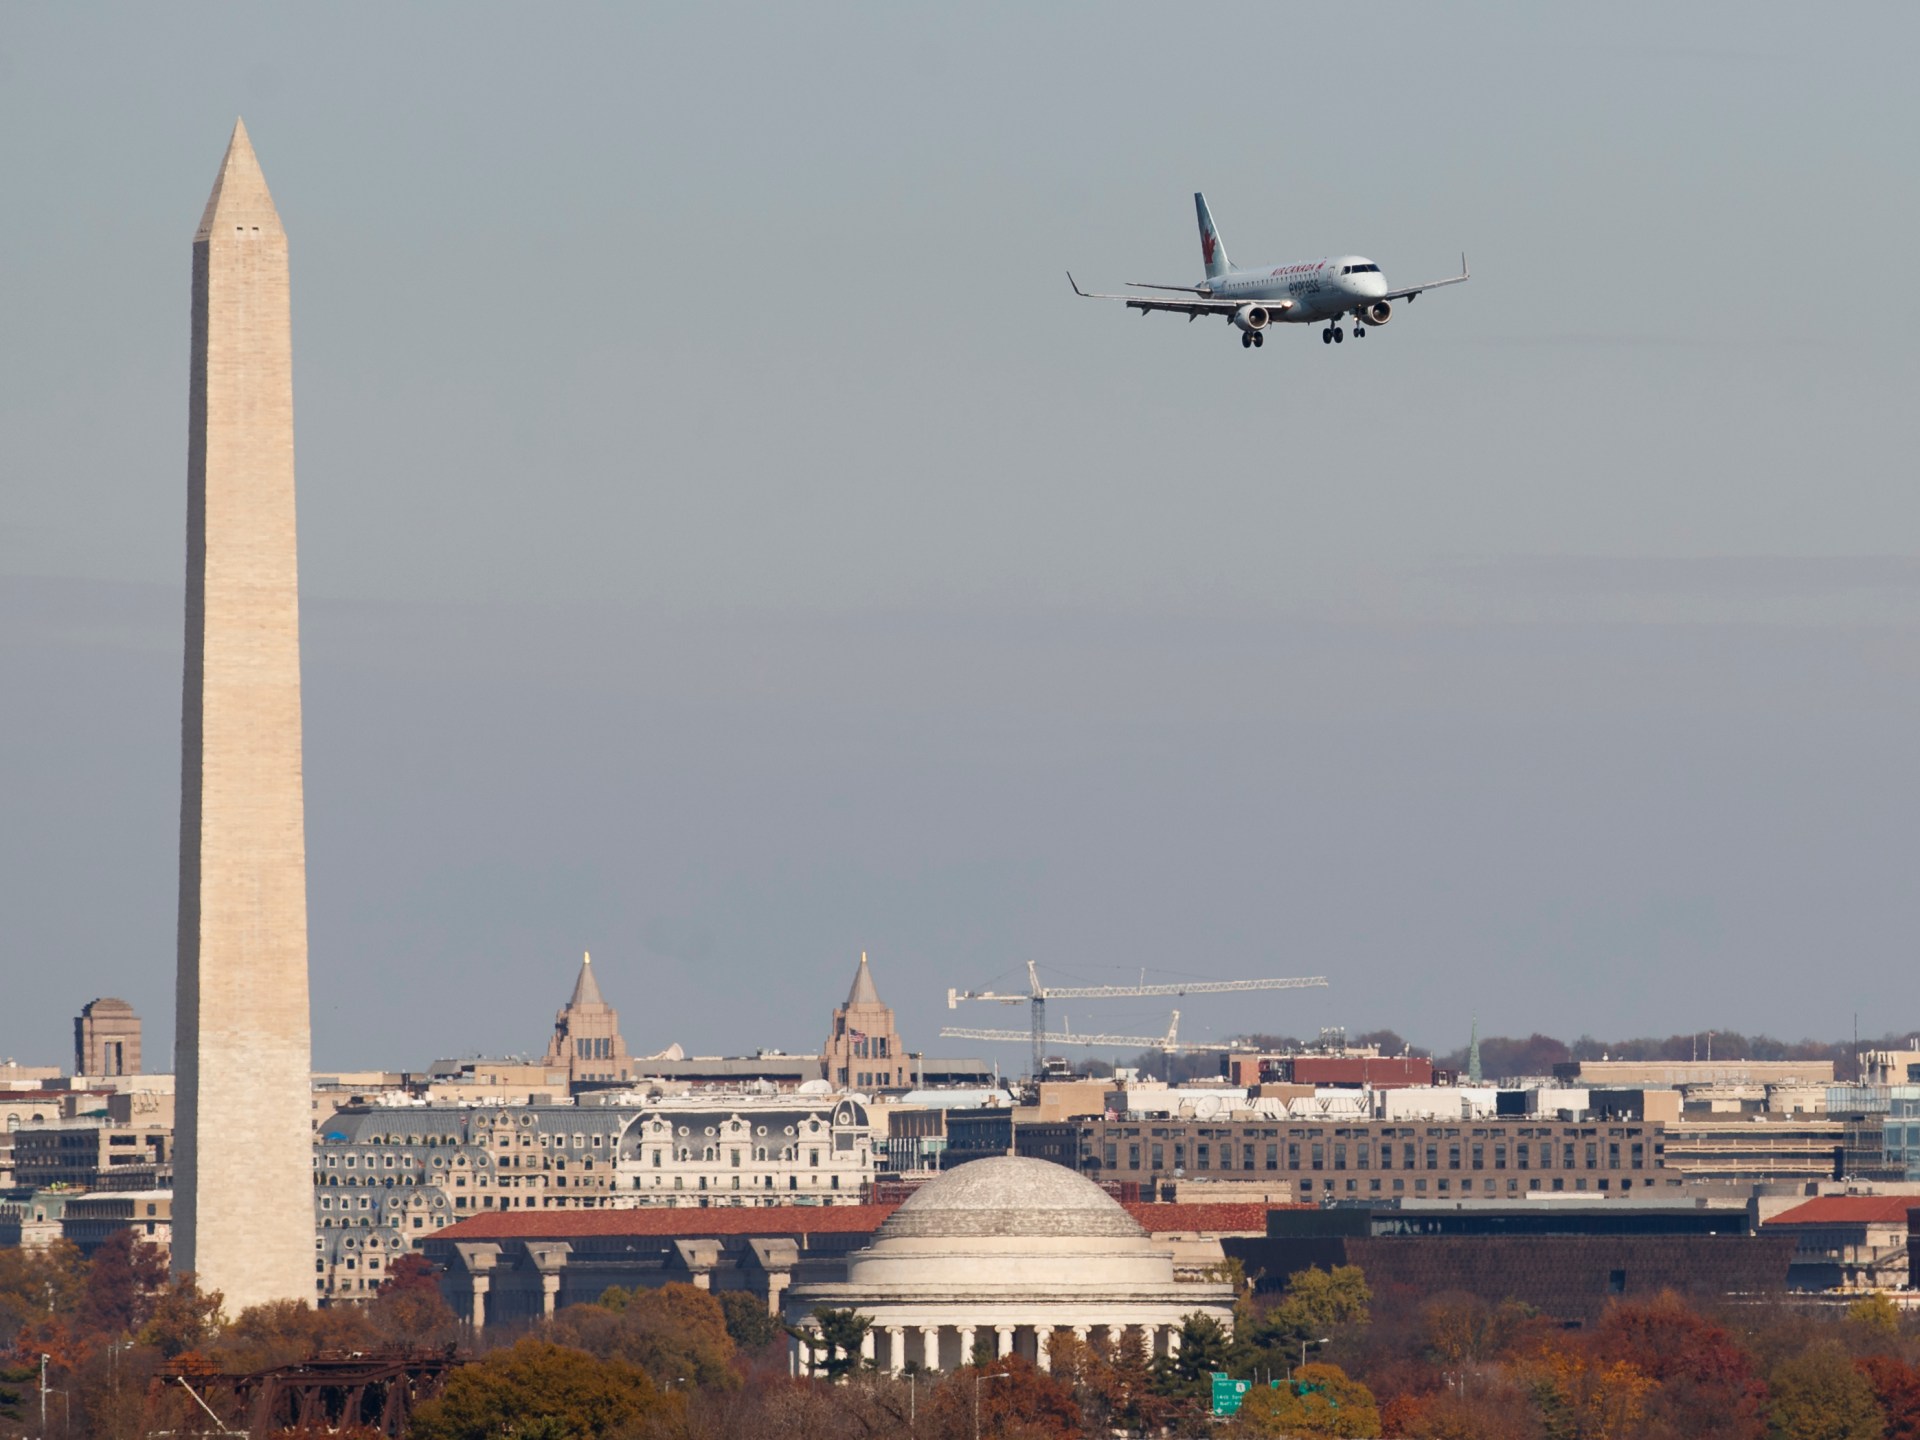 US fighter jets chase small plane over Washington, DC